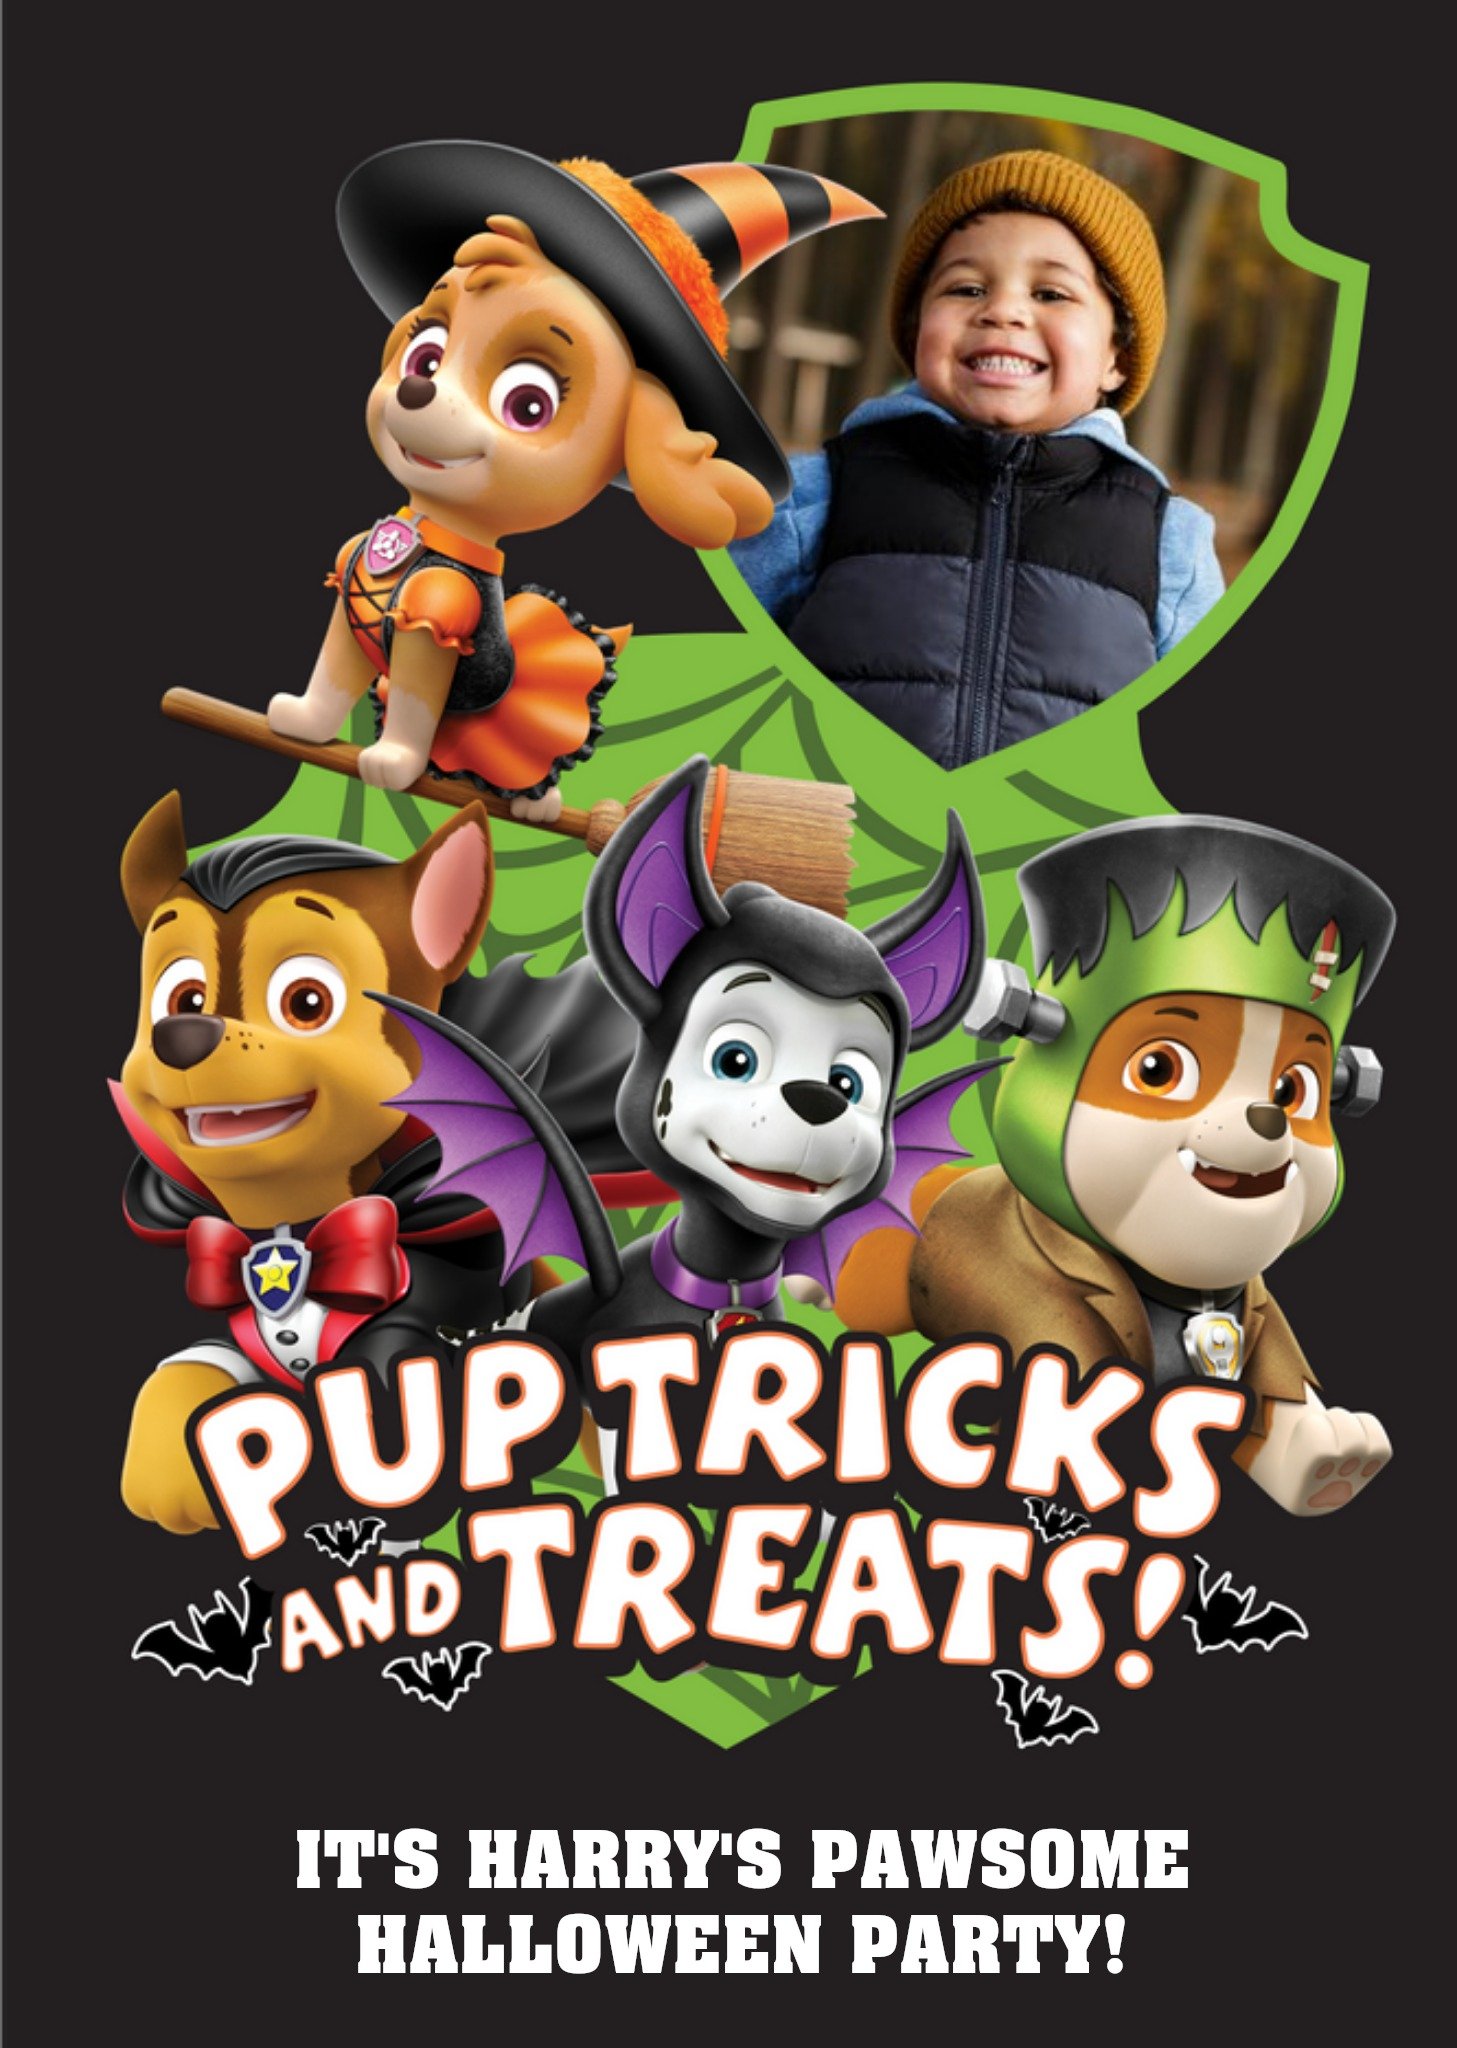 Paw Patrol Pup Tricks And Treats Personalised Halloween Party Invitation, Standard Card